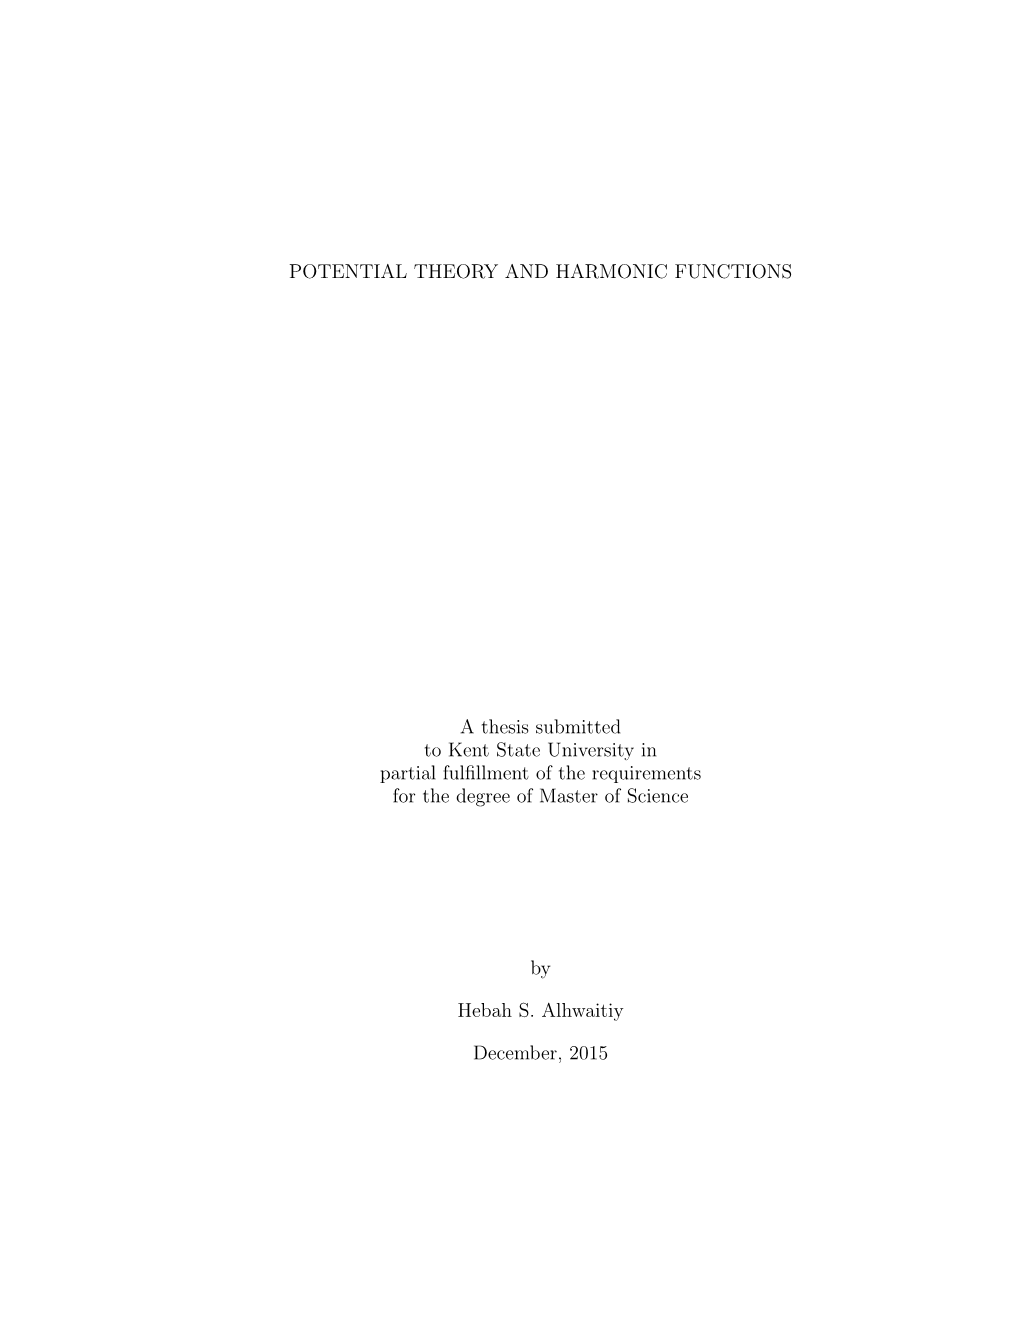 POTENTIAL THEORY and HARMONIC FUNCTIONS a Thesis Submitted to Kent State University in Partial Fulfillment of the Requirements F